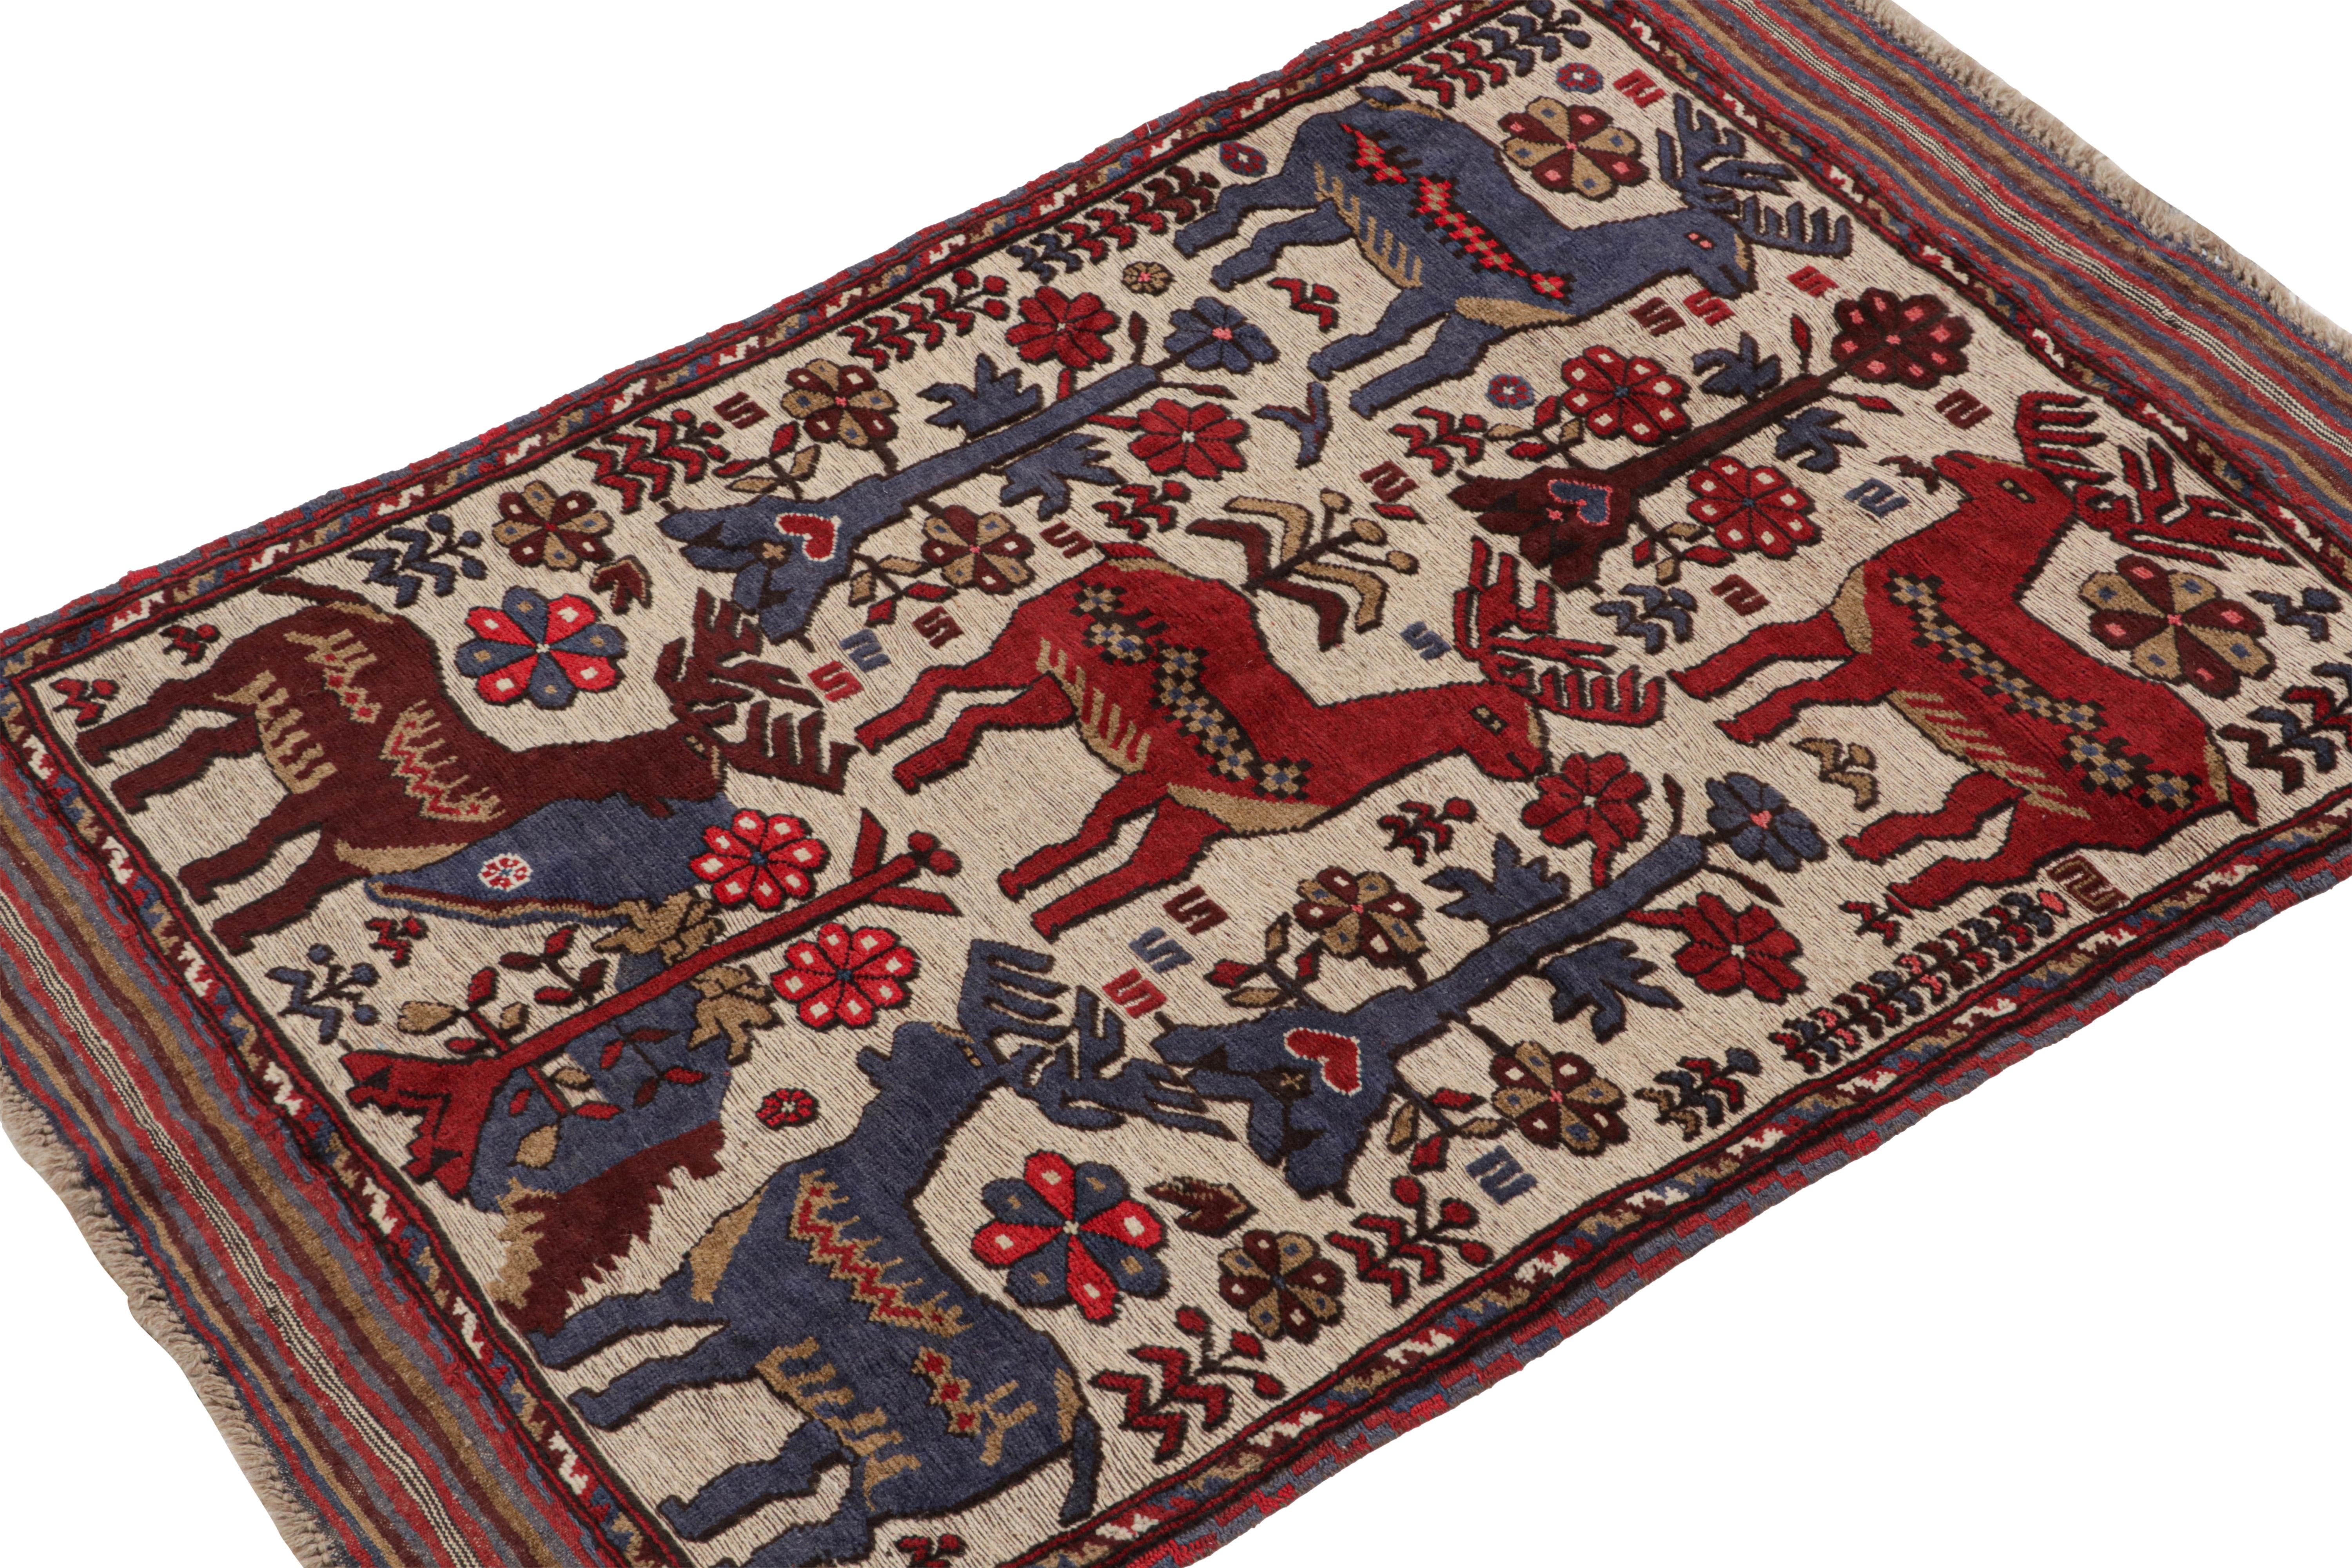 Inspired by the Persian Barjasta rugs, this 4x5 piece is the latest to join Rug & Kilim’s Modern Classics collection.

On the Design: 

The rug recaptures the tribal aesthetics of this lineage with a montage of eccentric designs. The frame boasts a